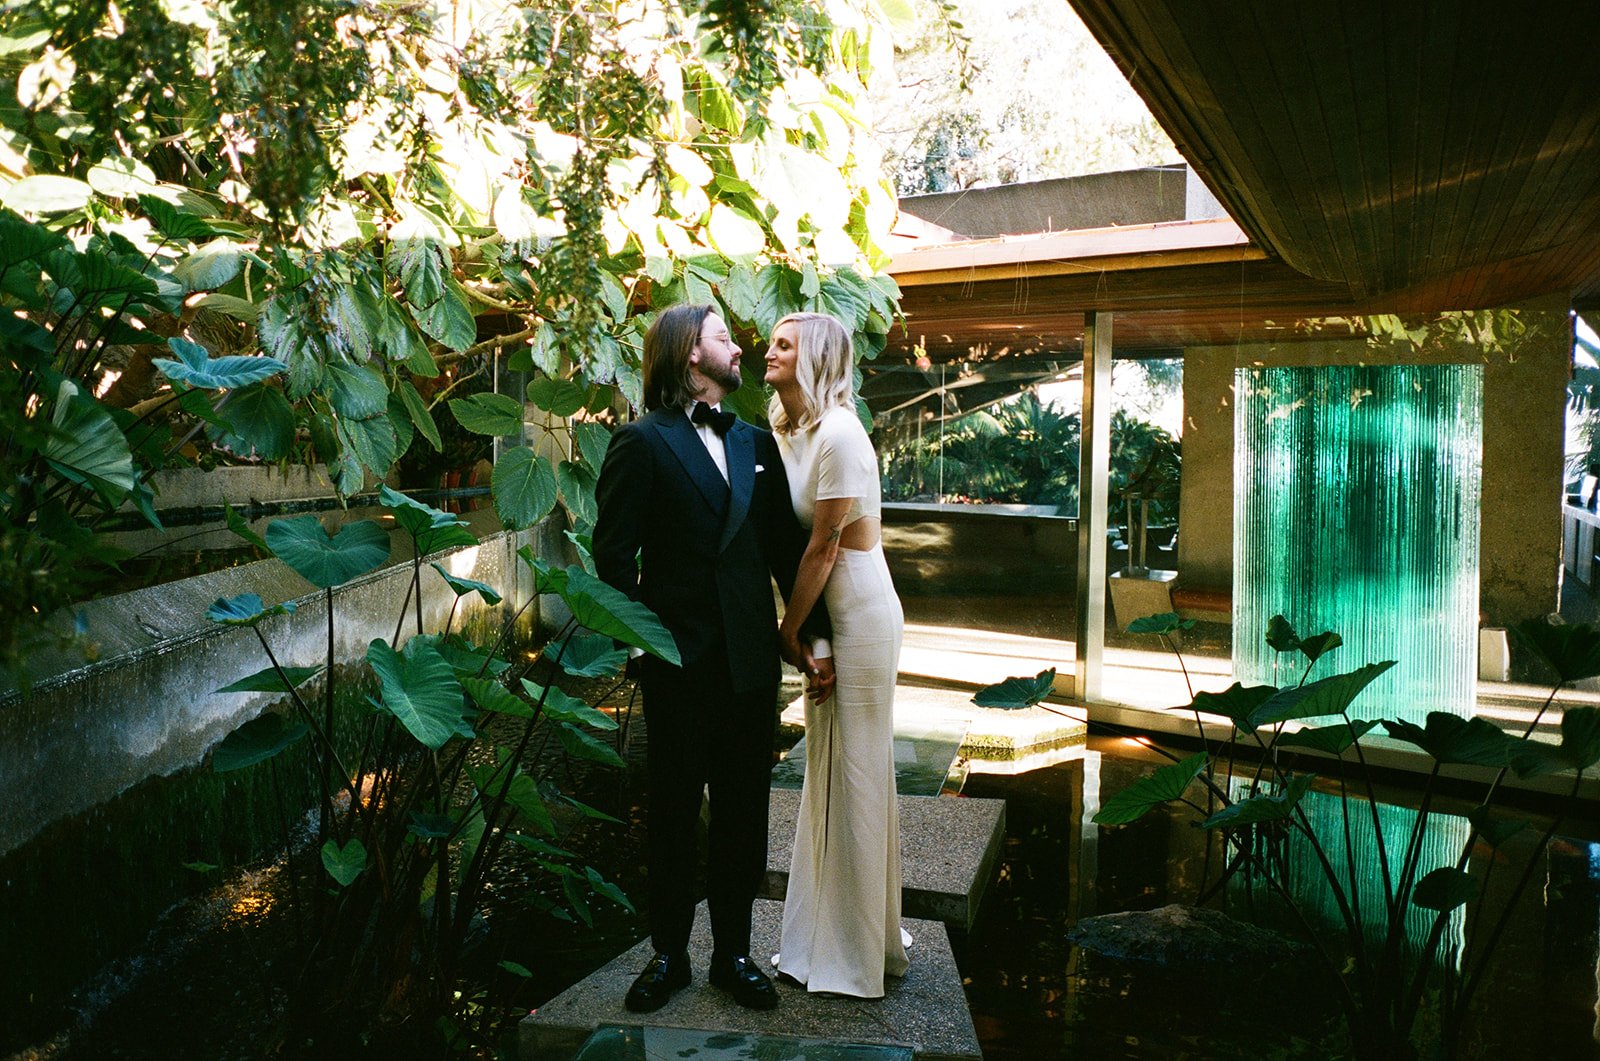 photographer takes film photos of the bride and groom at the iconic Sheats–Goldstein Residence in beverly hills